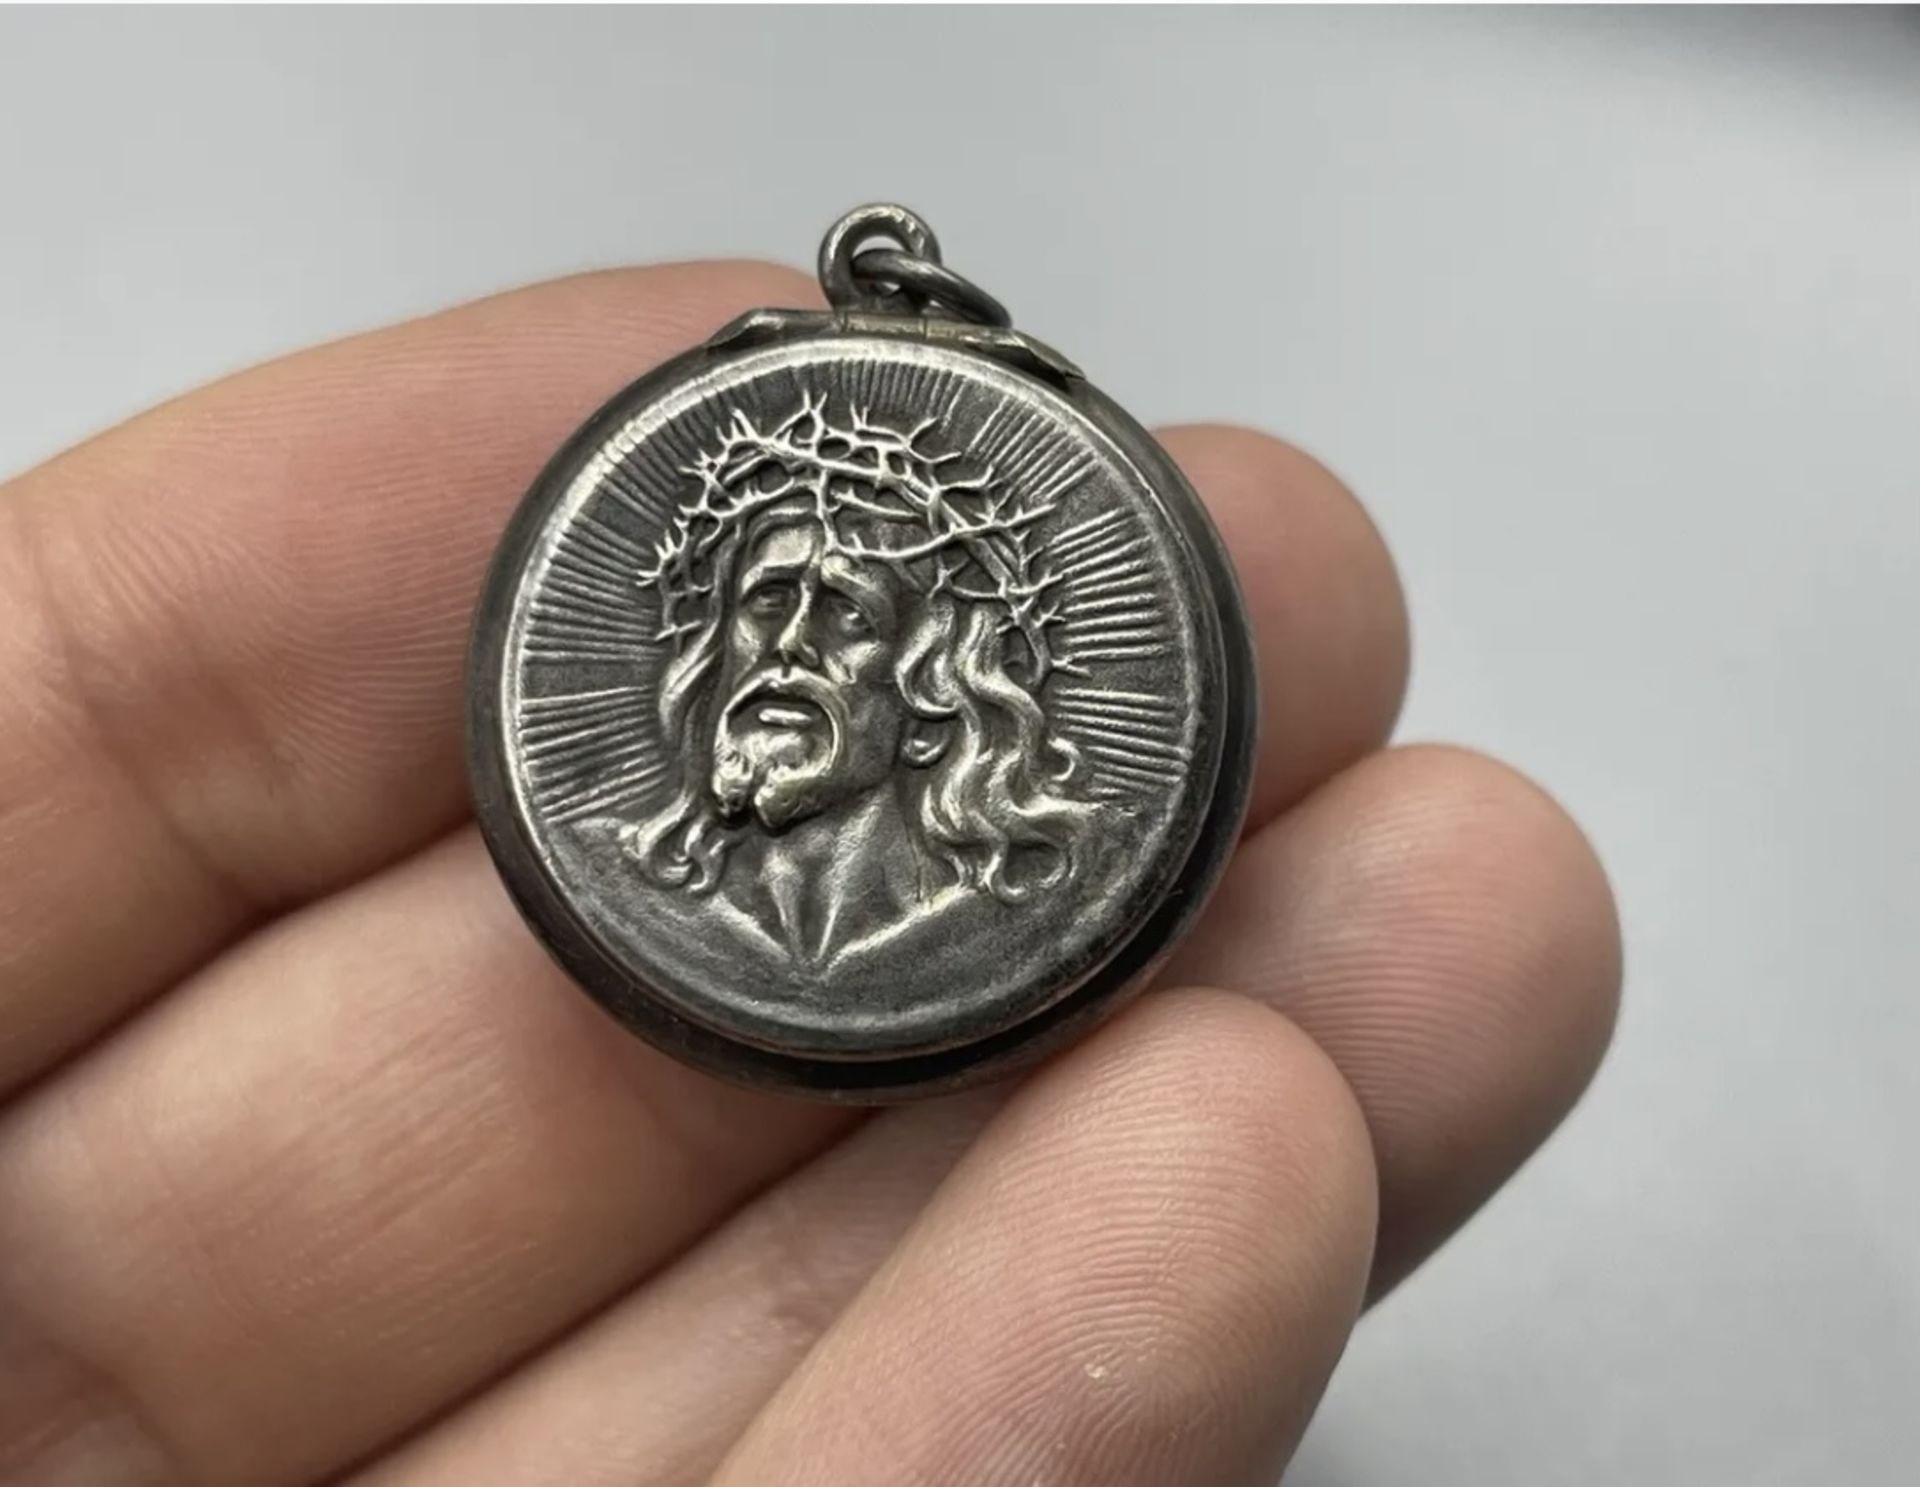 Vintage Jesus Pill Box Pendant Unmarked Silver Crucifixion Crown Thorn Christian